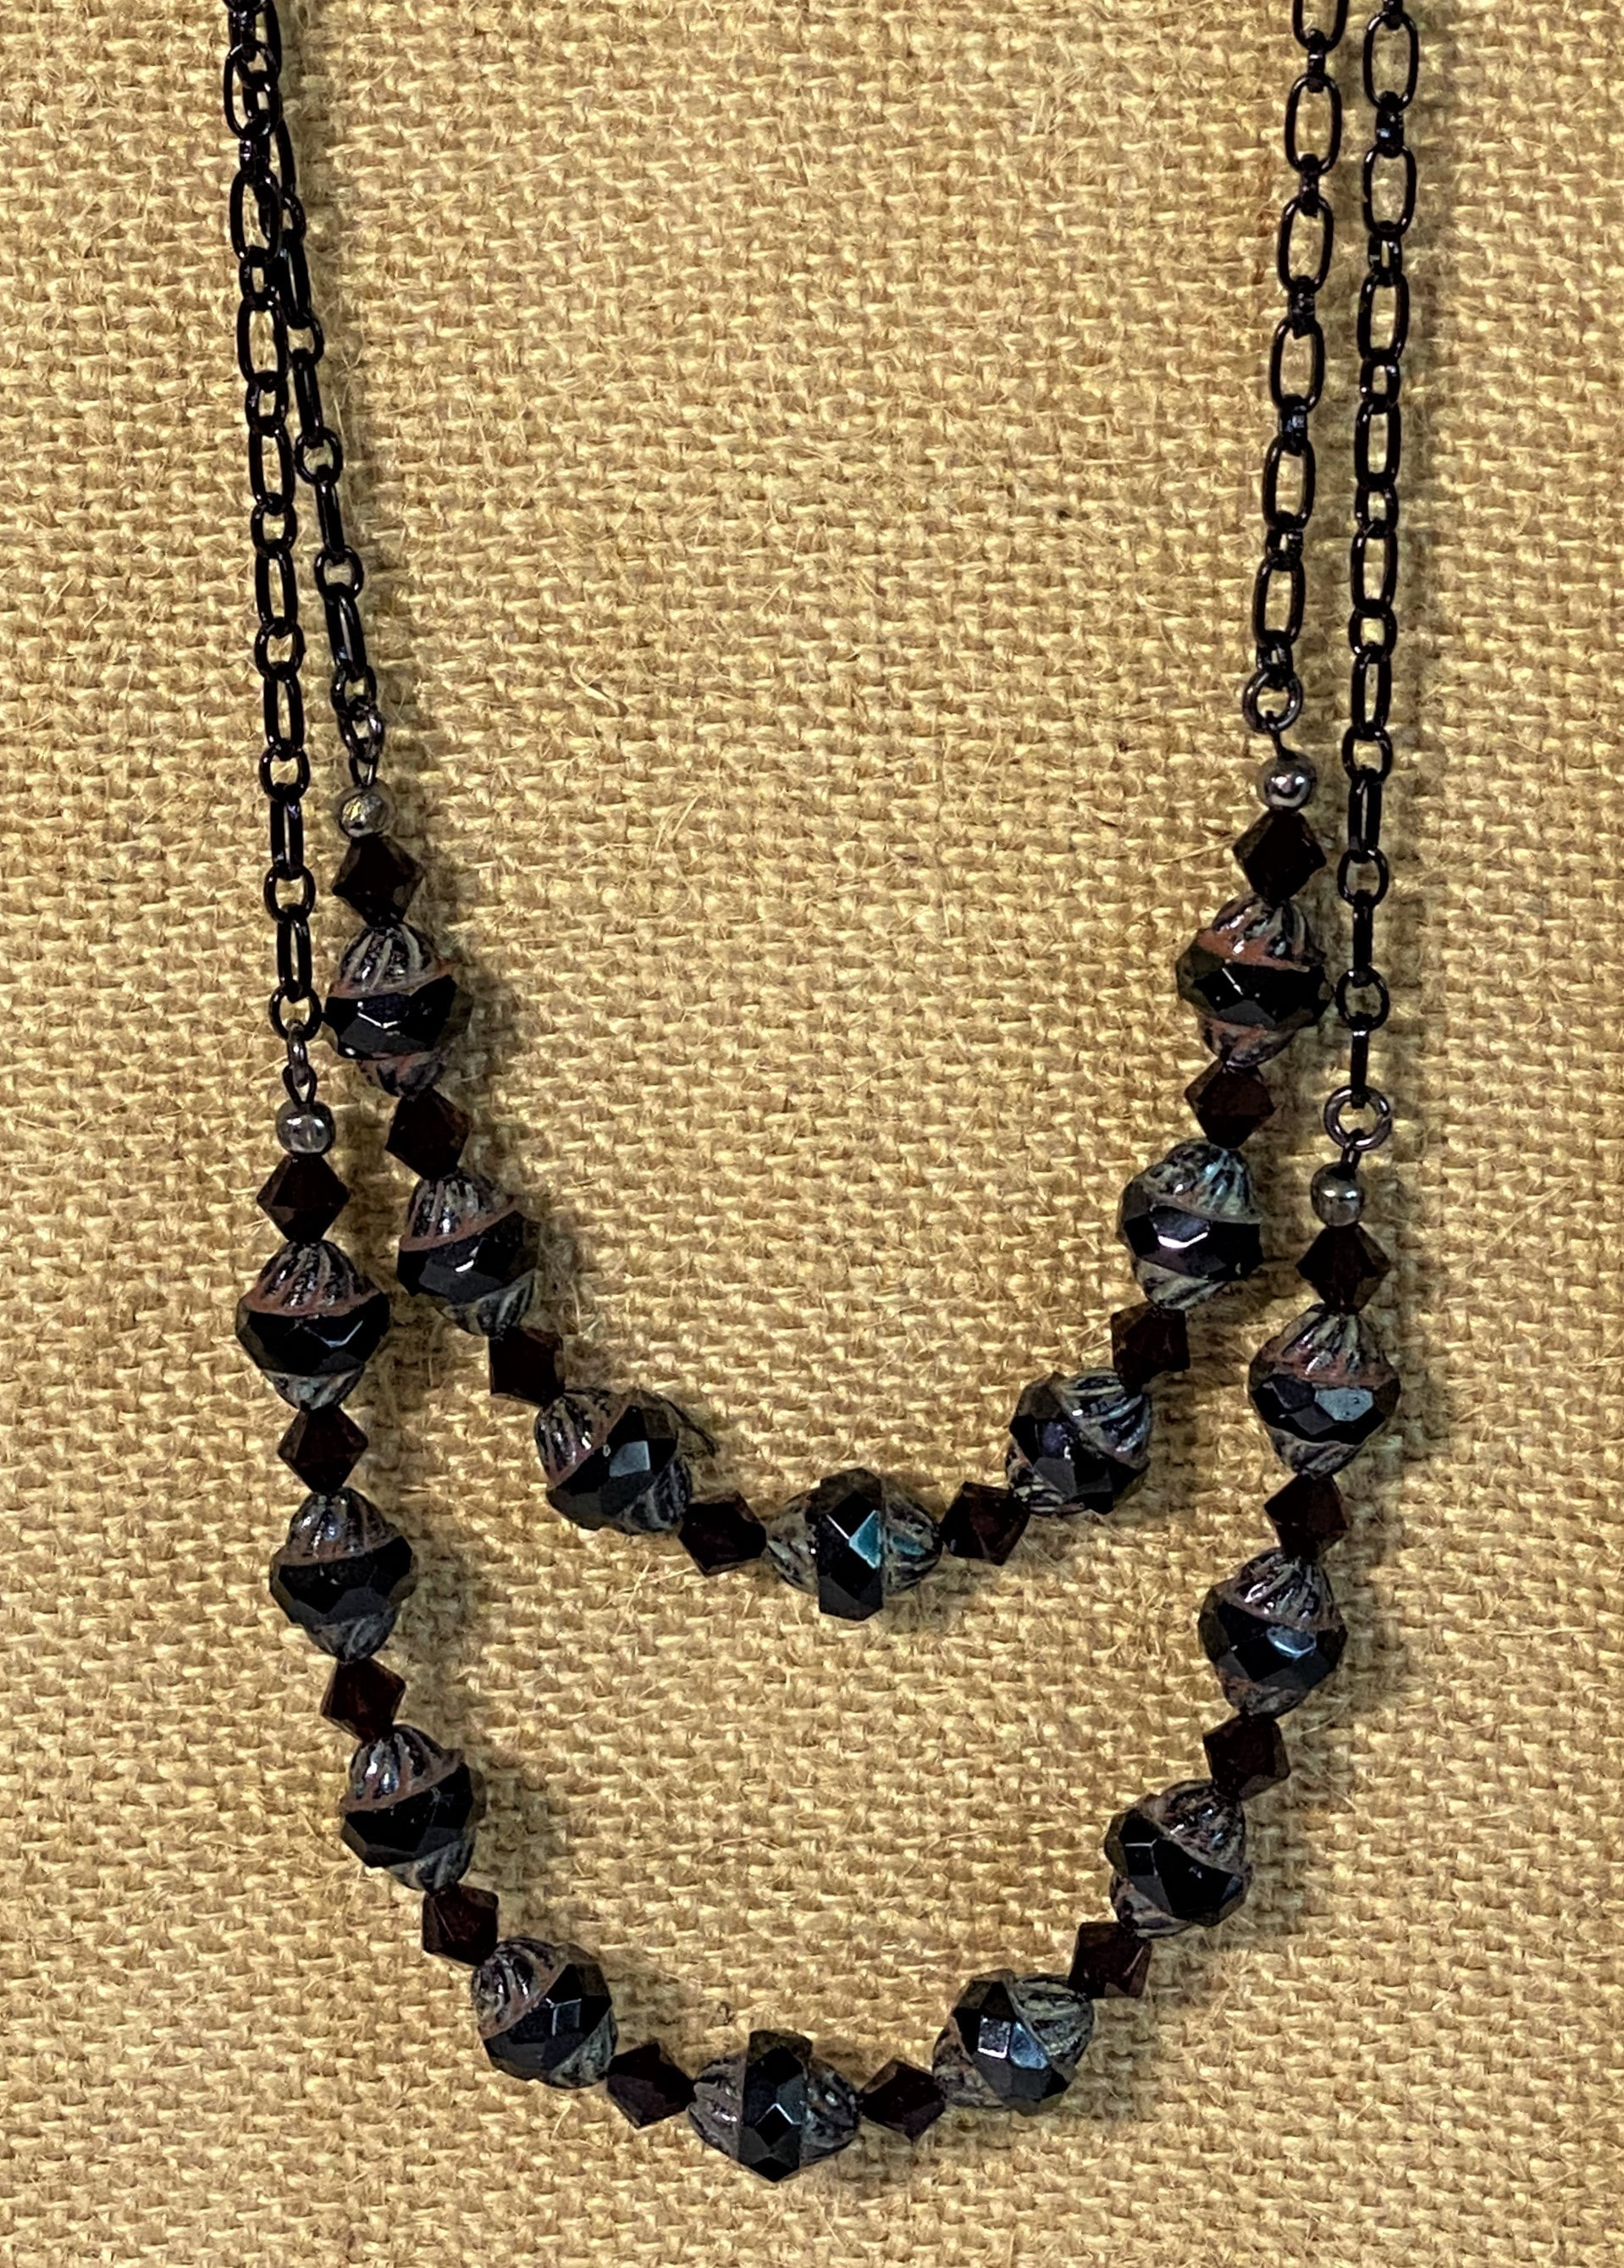 Garnett colored two tiered Necklace